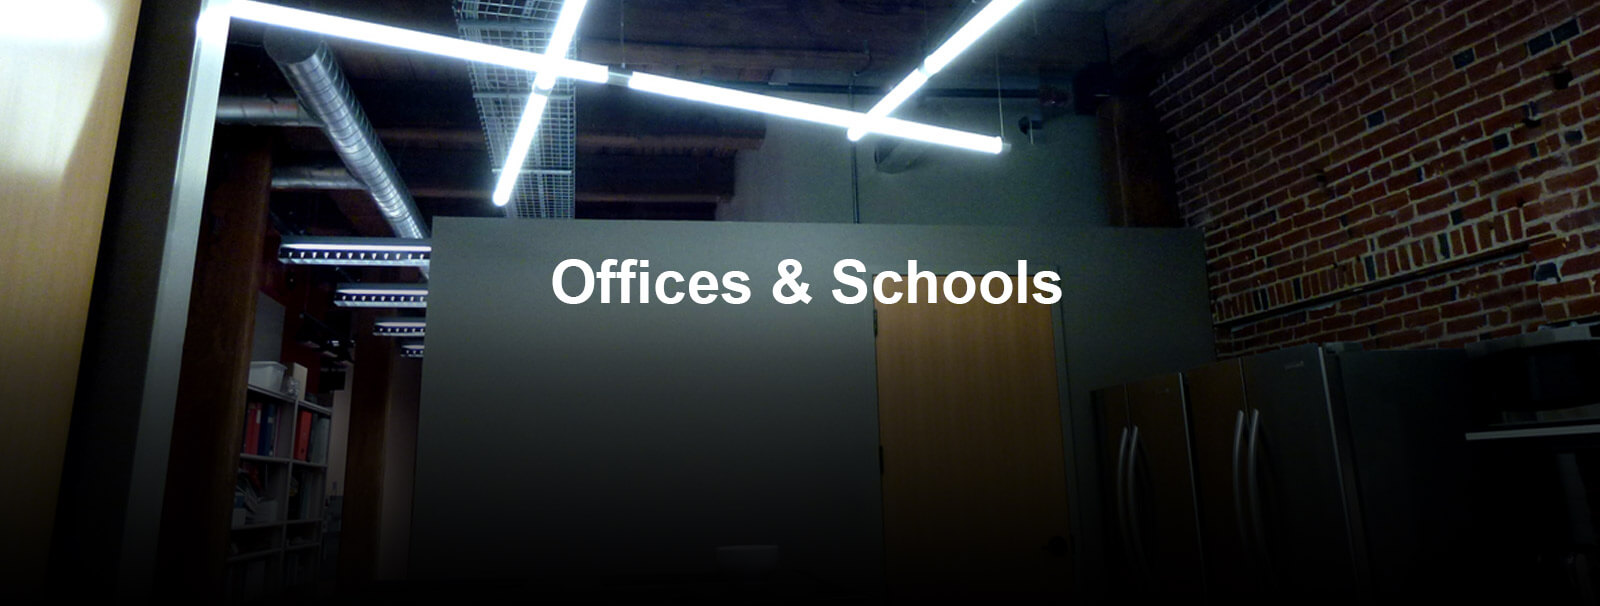 Offices & Schools - Skybay High Bay